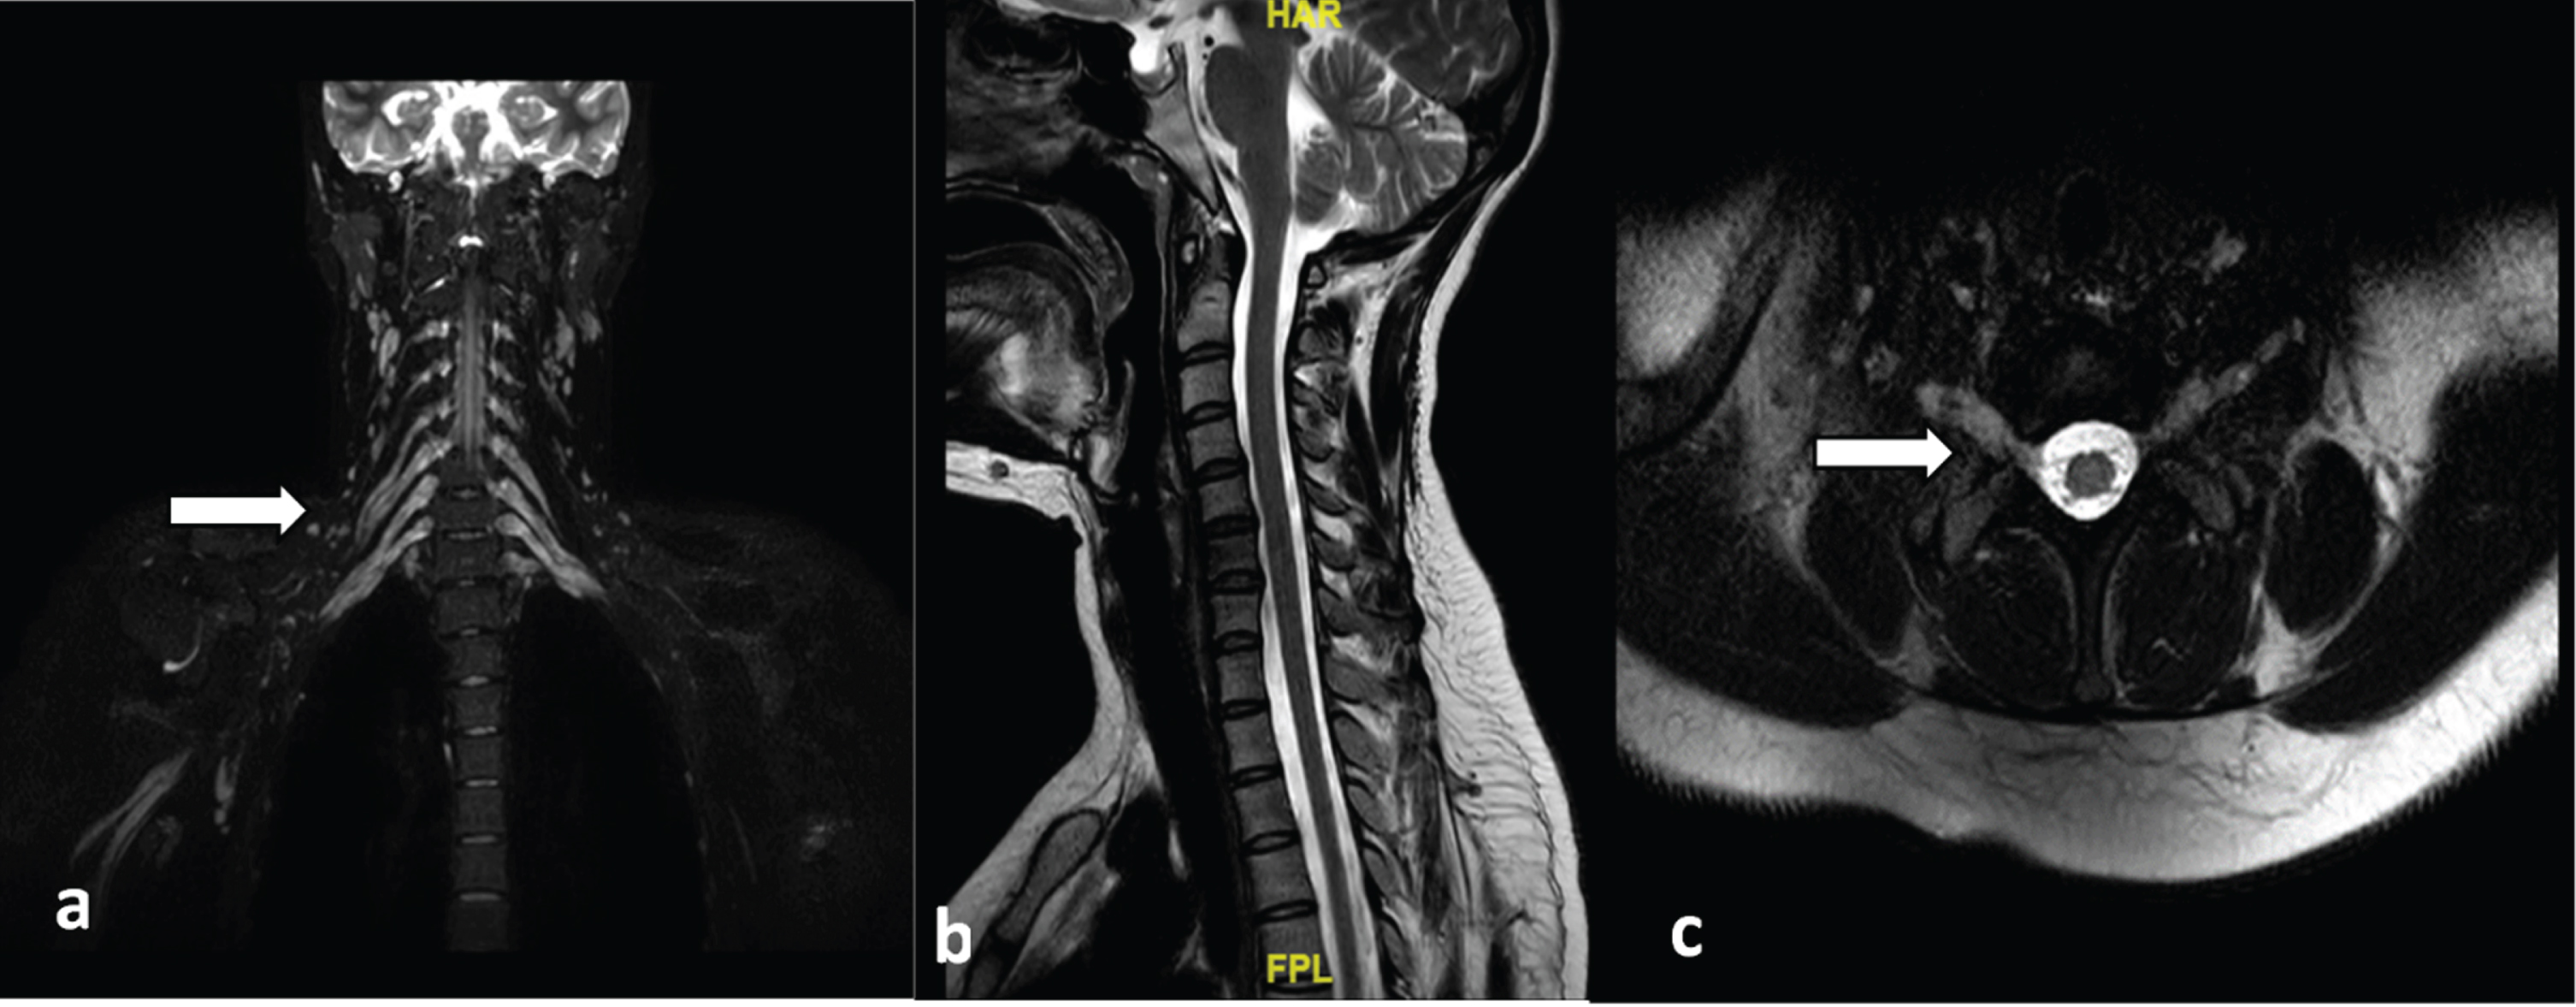 MRI of the Brachial plexus. (a,c) Near symmetric thickening with T2 hyperintense signal of the roots, trunks, divisions, and cords of the bilateral brachial plexii (arrows), (b) T2W image of the sagittal section showing normal spinal cord. (MRI, Magnetic resonance imaging).